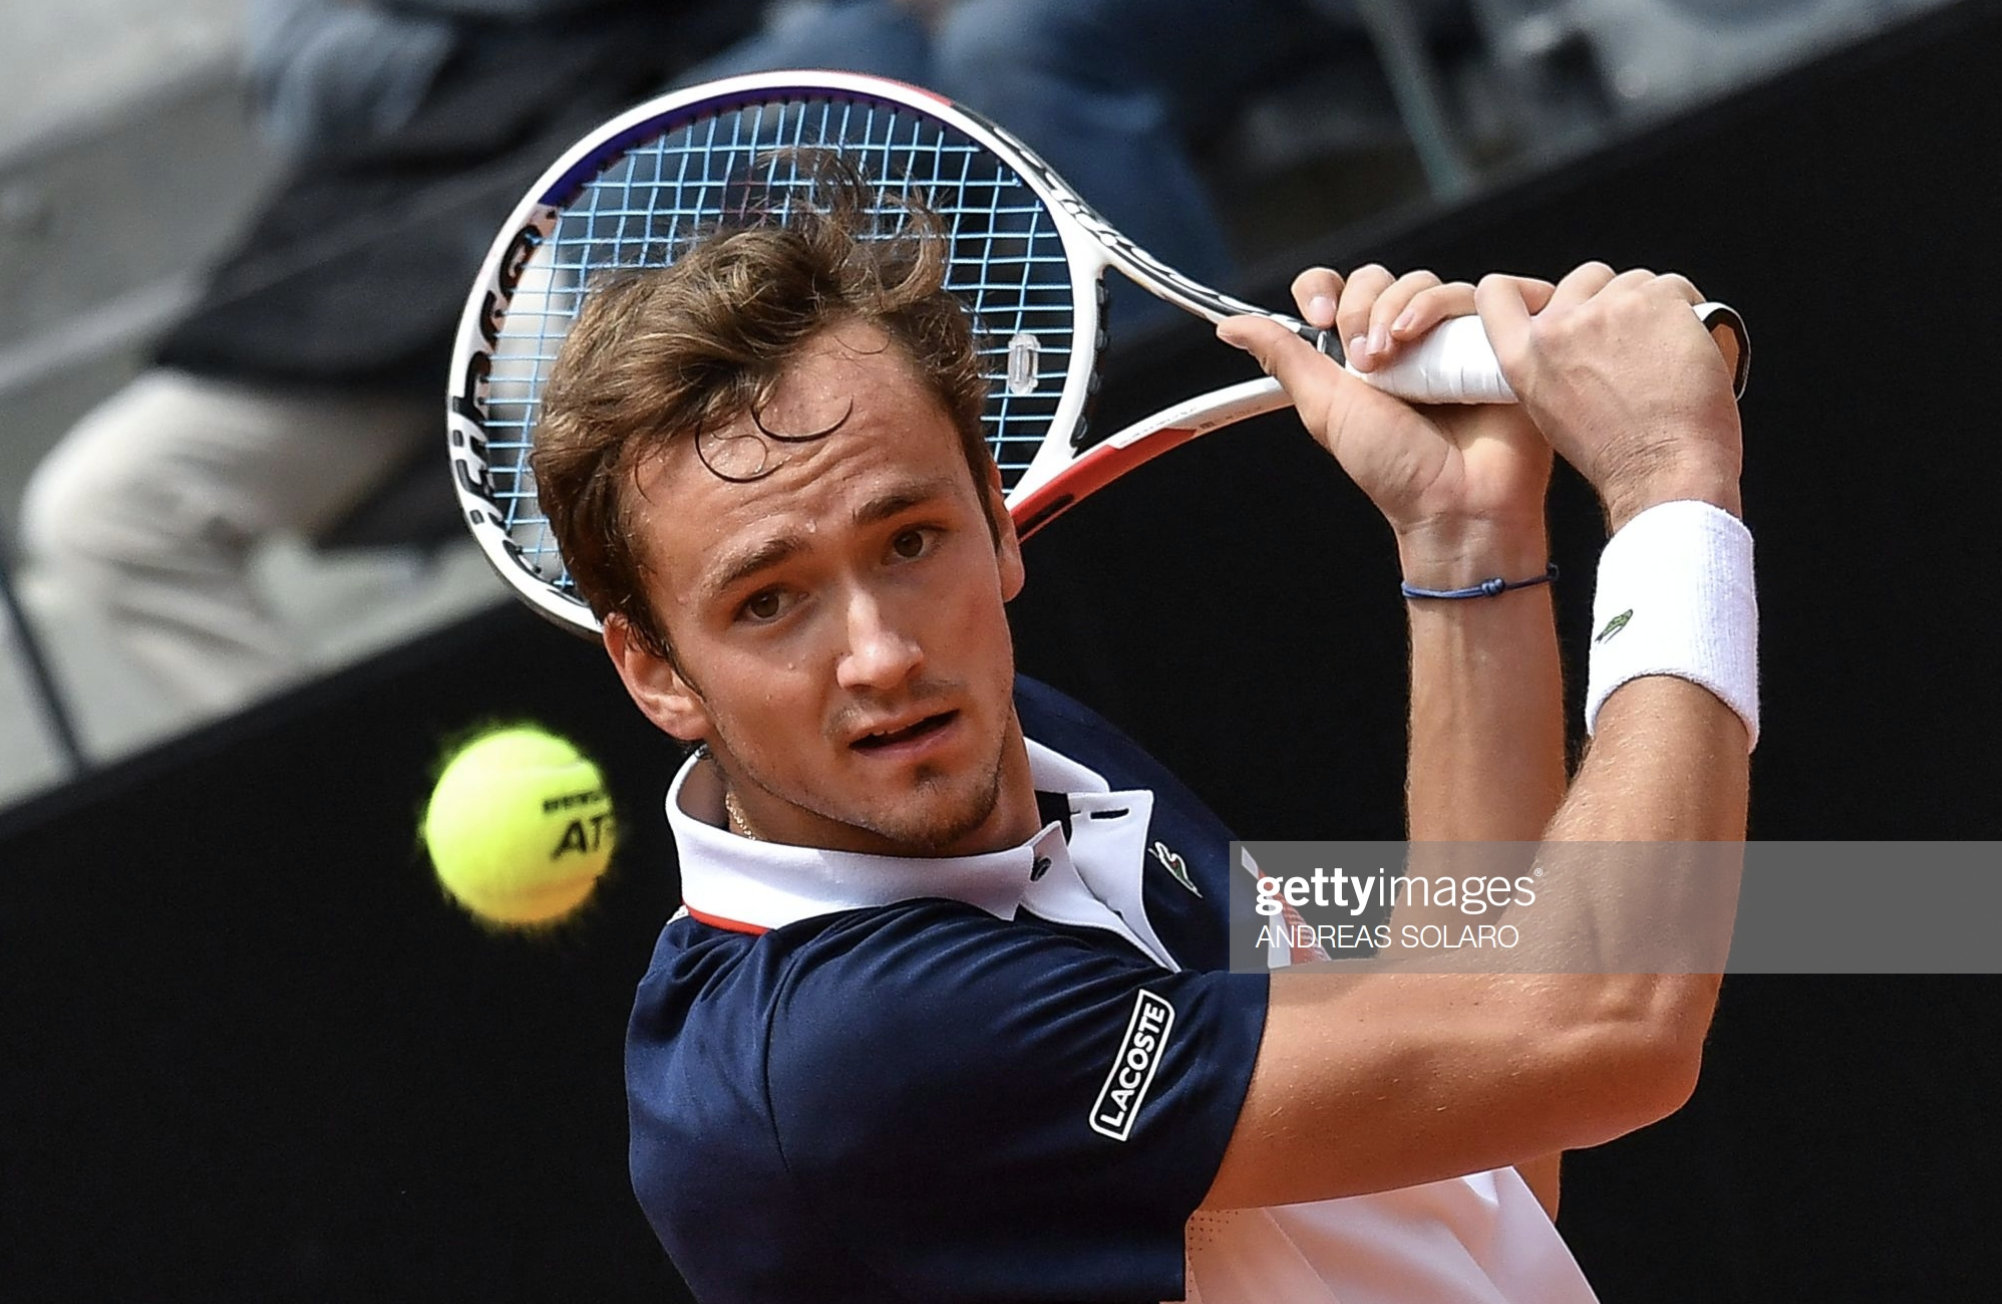 Medvedev, Sinner ready for another final duel in Vienna